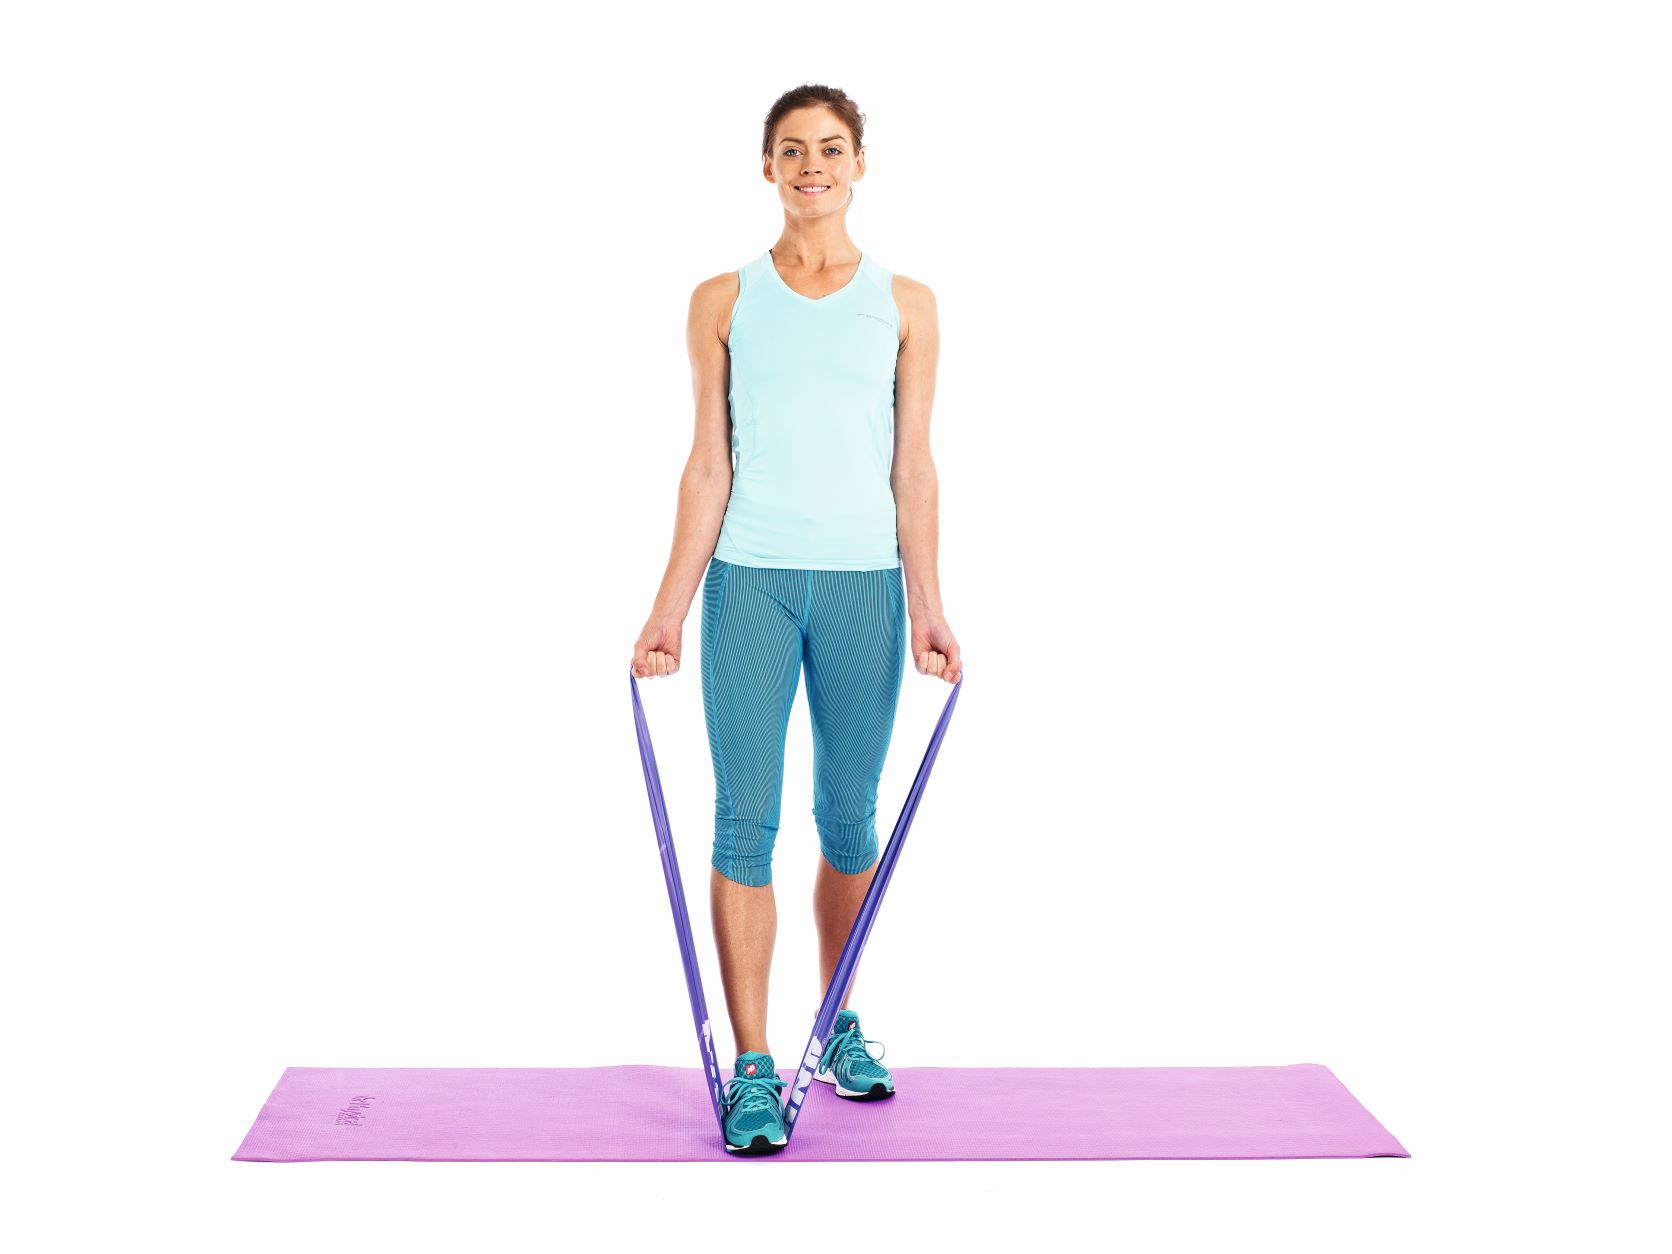 Resistance band bicep curl